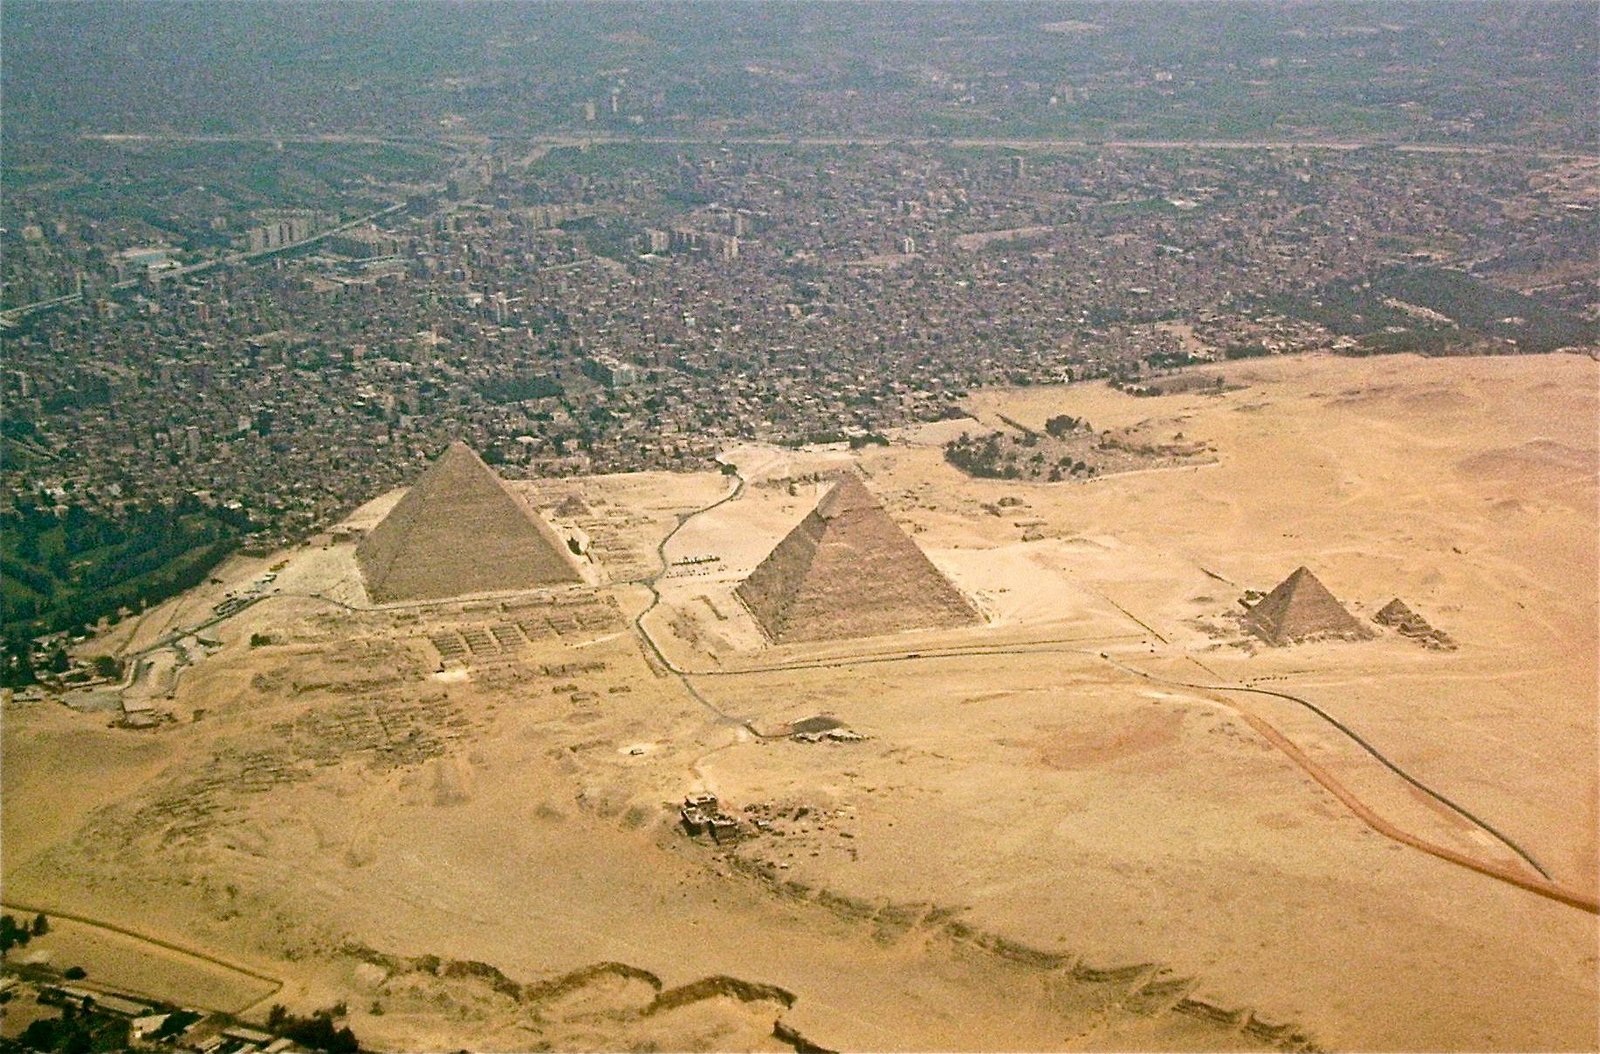 Egyptian pyramids building the pyramids in ِAncient Egypt